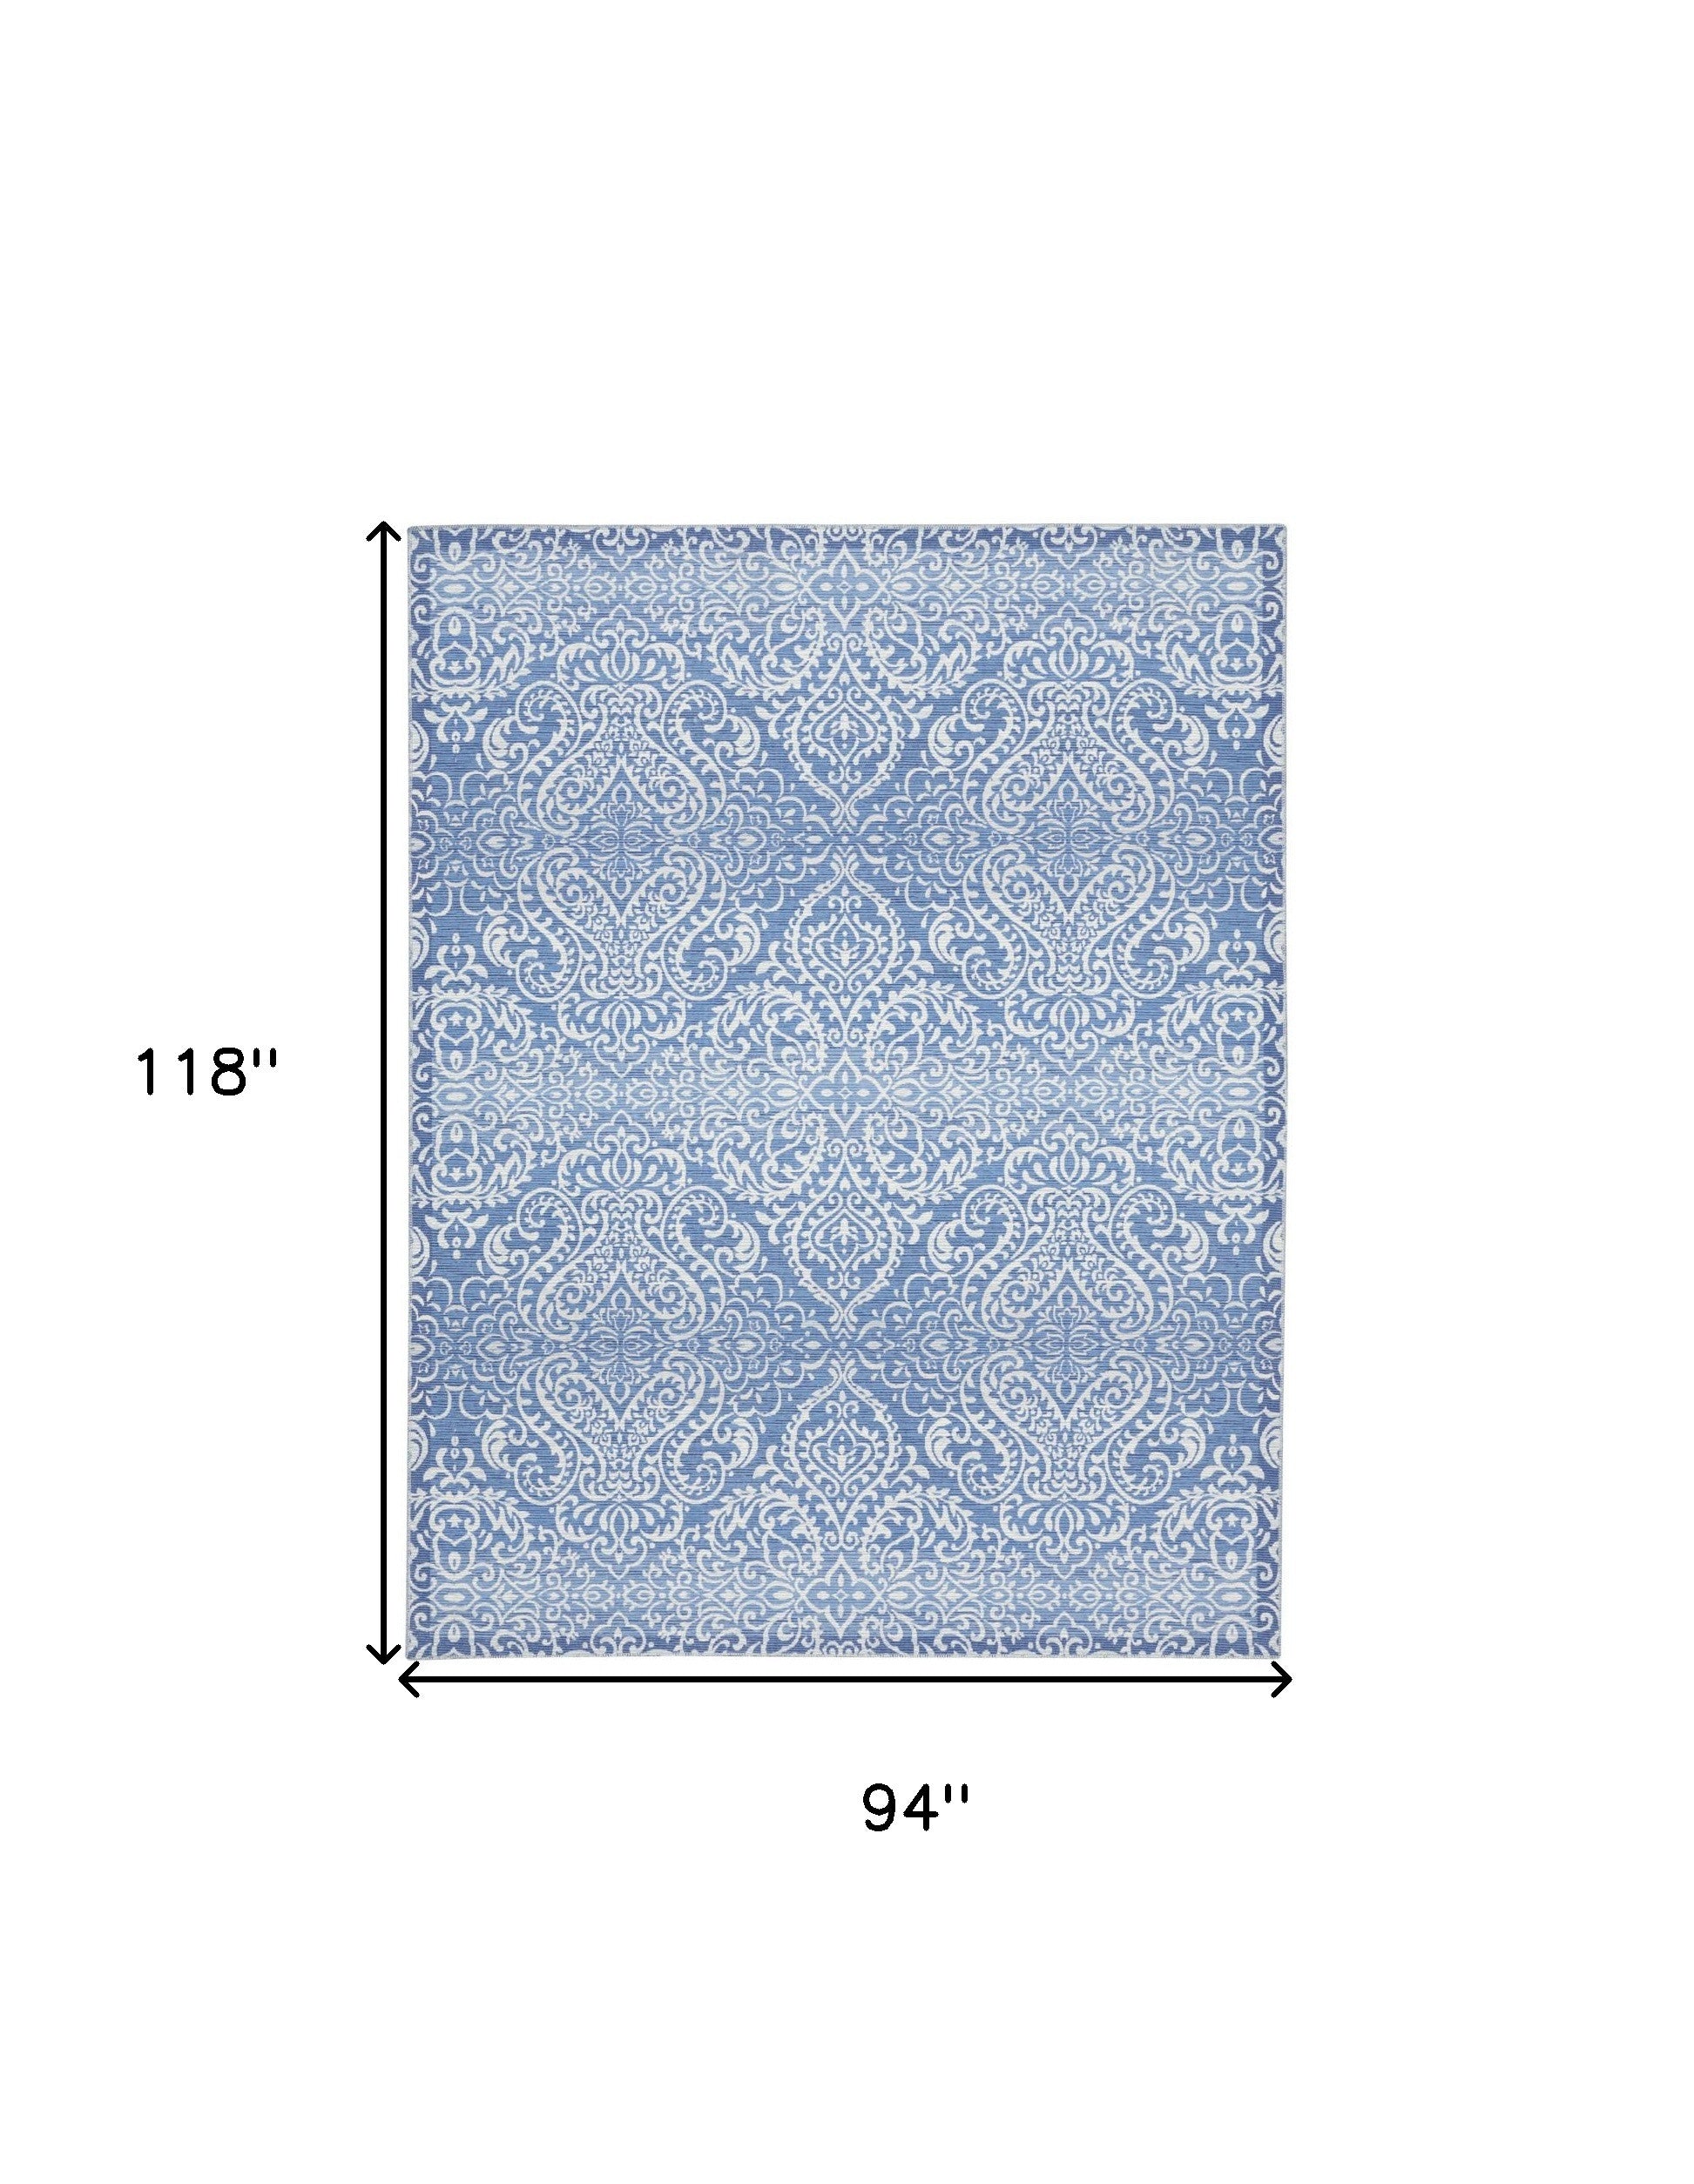 8' X 10' Blue Floral Distressed Washable Area Rug